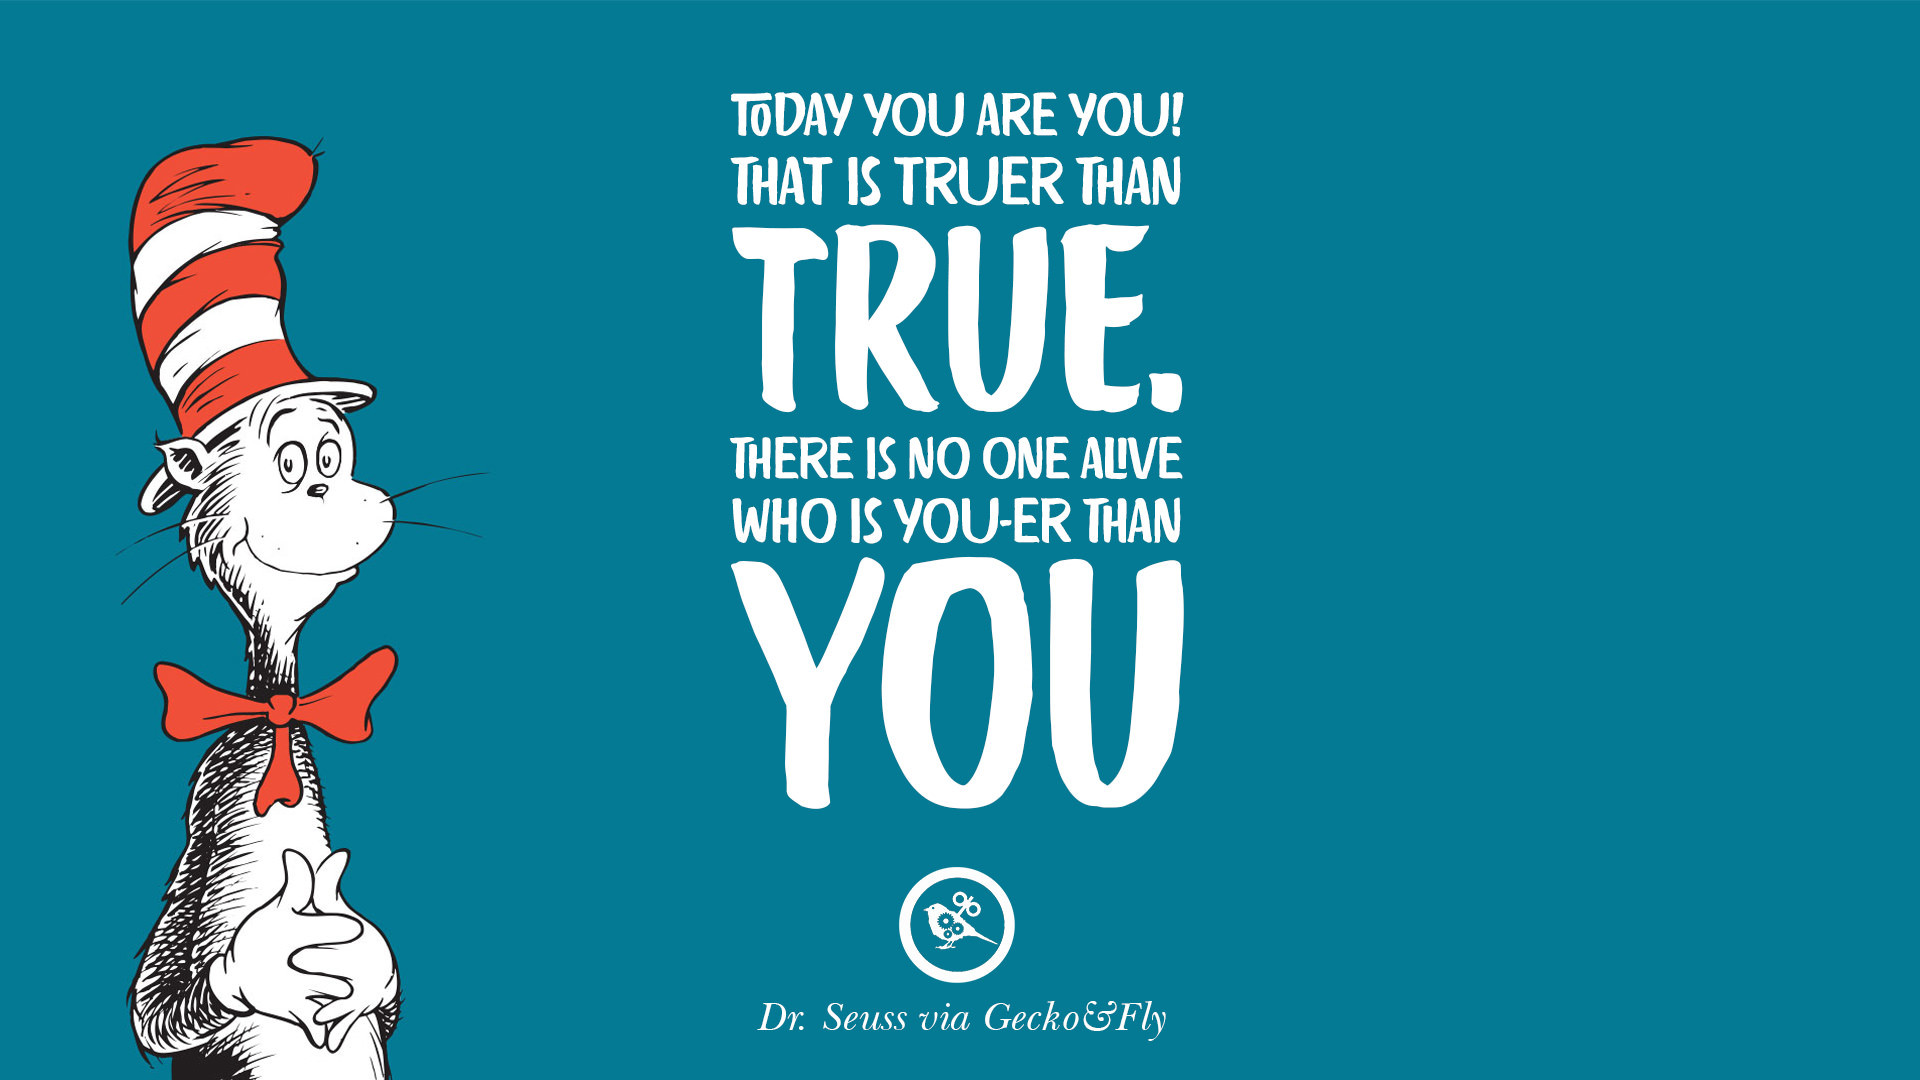 Love Quotes Dr.Seuss
 10 Beautiful Dr Seuss Quotes Love And Life